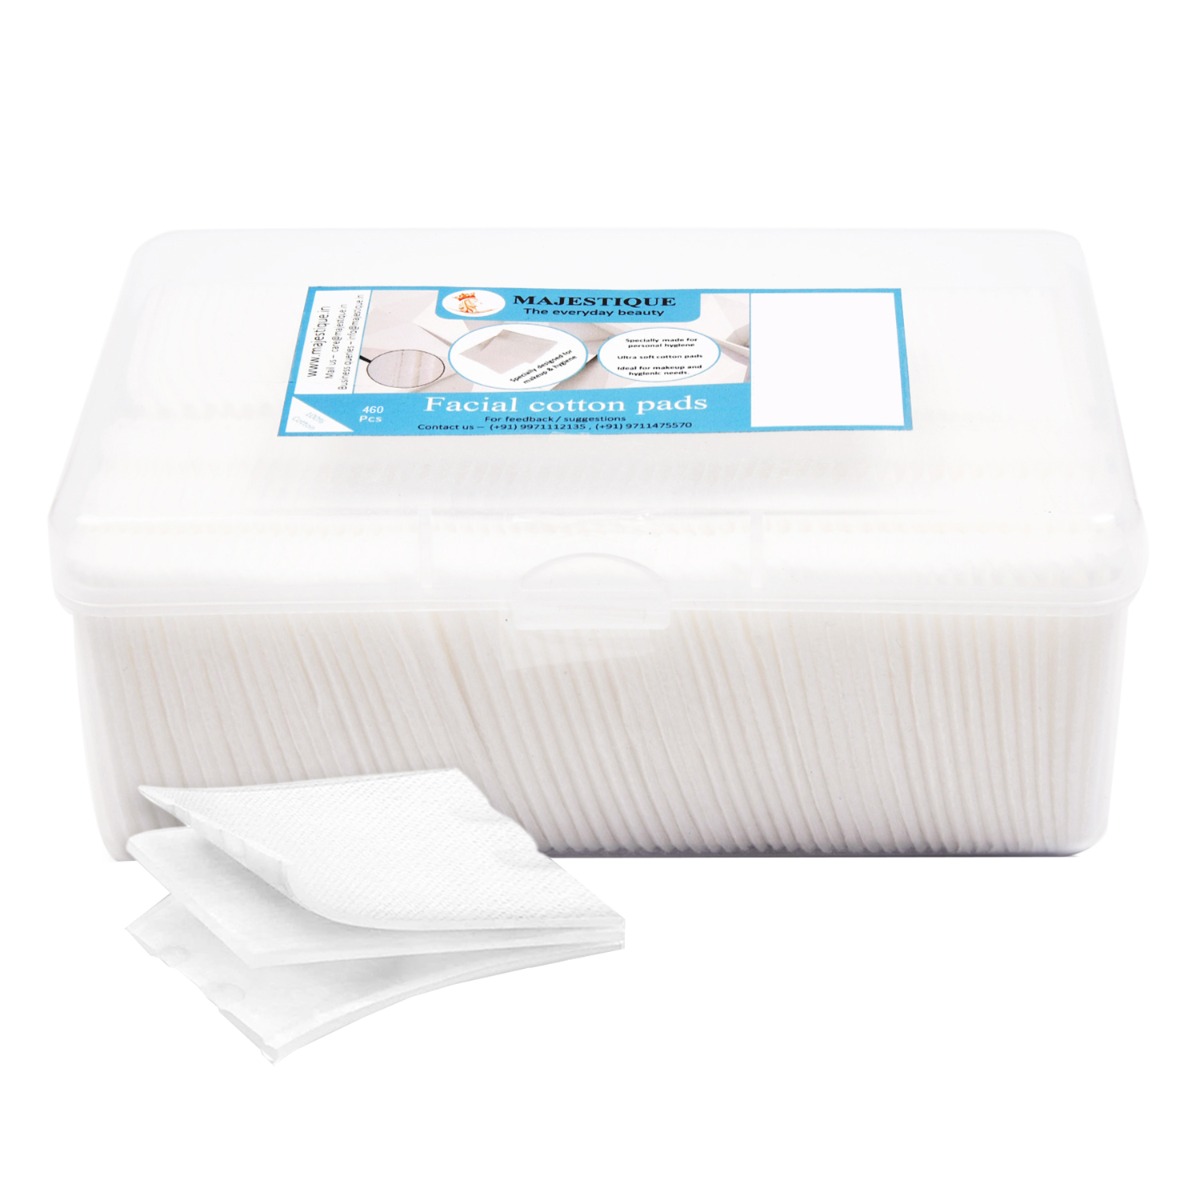 Majestique Facial Cotton Pads, Makeup Removing Wipes - 460Wipes, 1 Pack